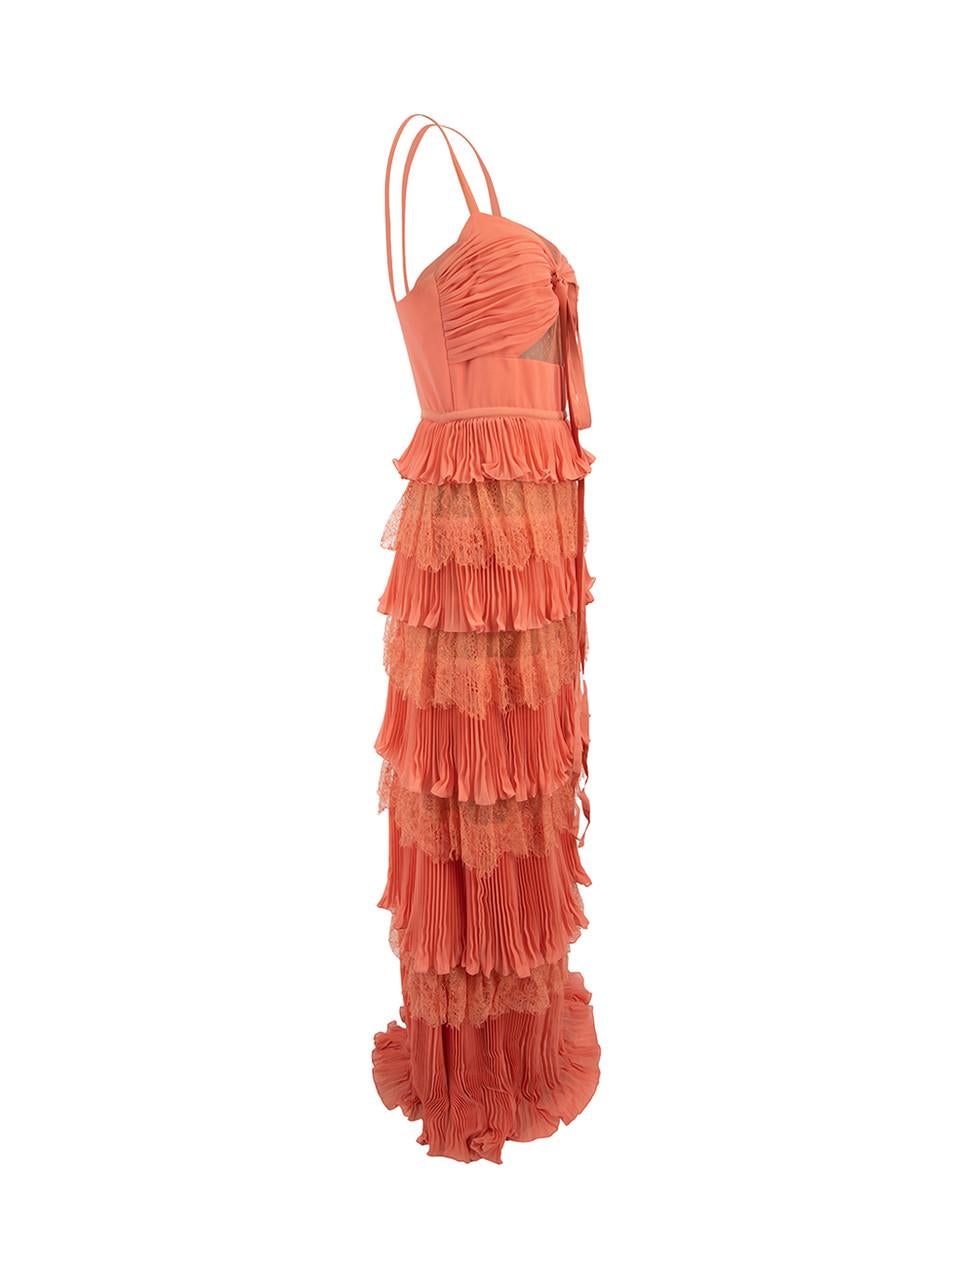 CONDITION is Very good. Minimal wear to dress is evident. Minimal wear to the shoulder straps and the underarms on this used Elie Saab designer resale item.   Details  Coral Lace Maxi dress Tiered layers skirt Pleated with floral and polkadot lace